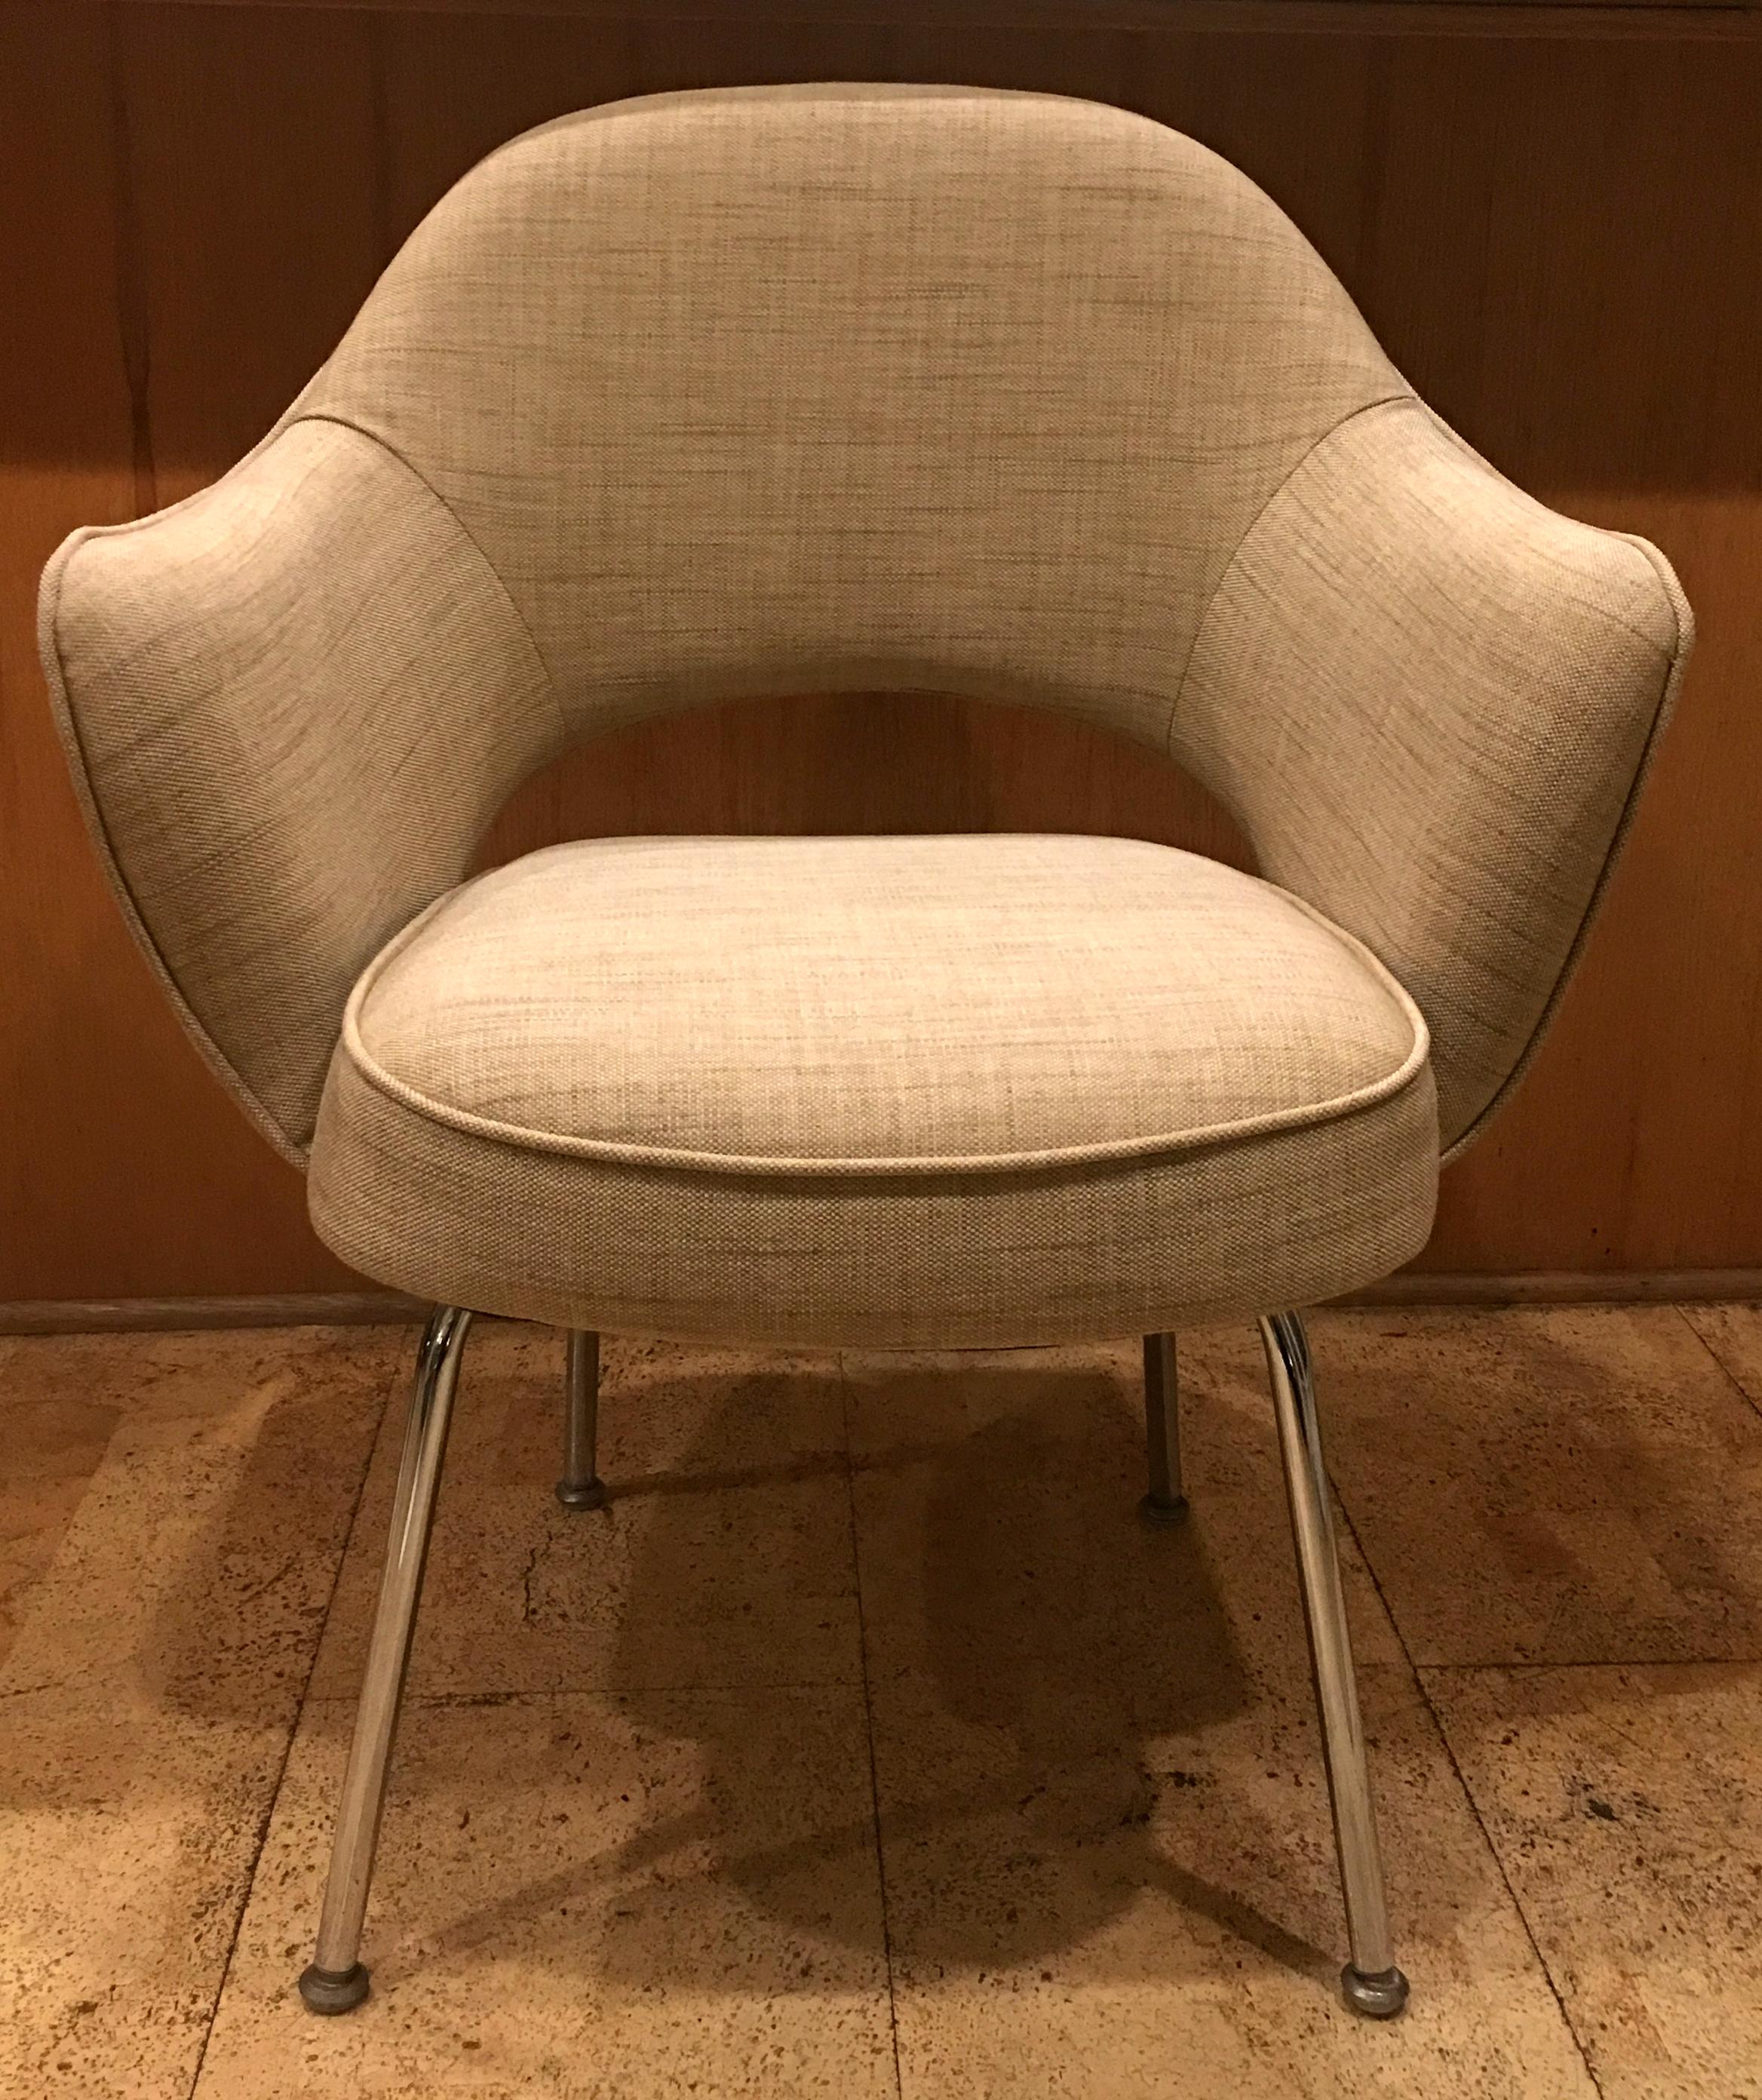 Set of six executive armchairs by Eero Saarinen for Knoll. The chairs are in virtual Mint condition and have been freshly reupholstered in a handsome Tan cotton/linen(look) Sunbrella fabric.  